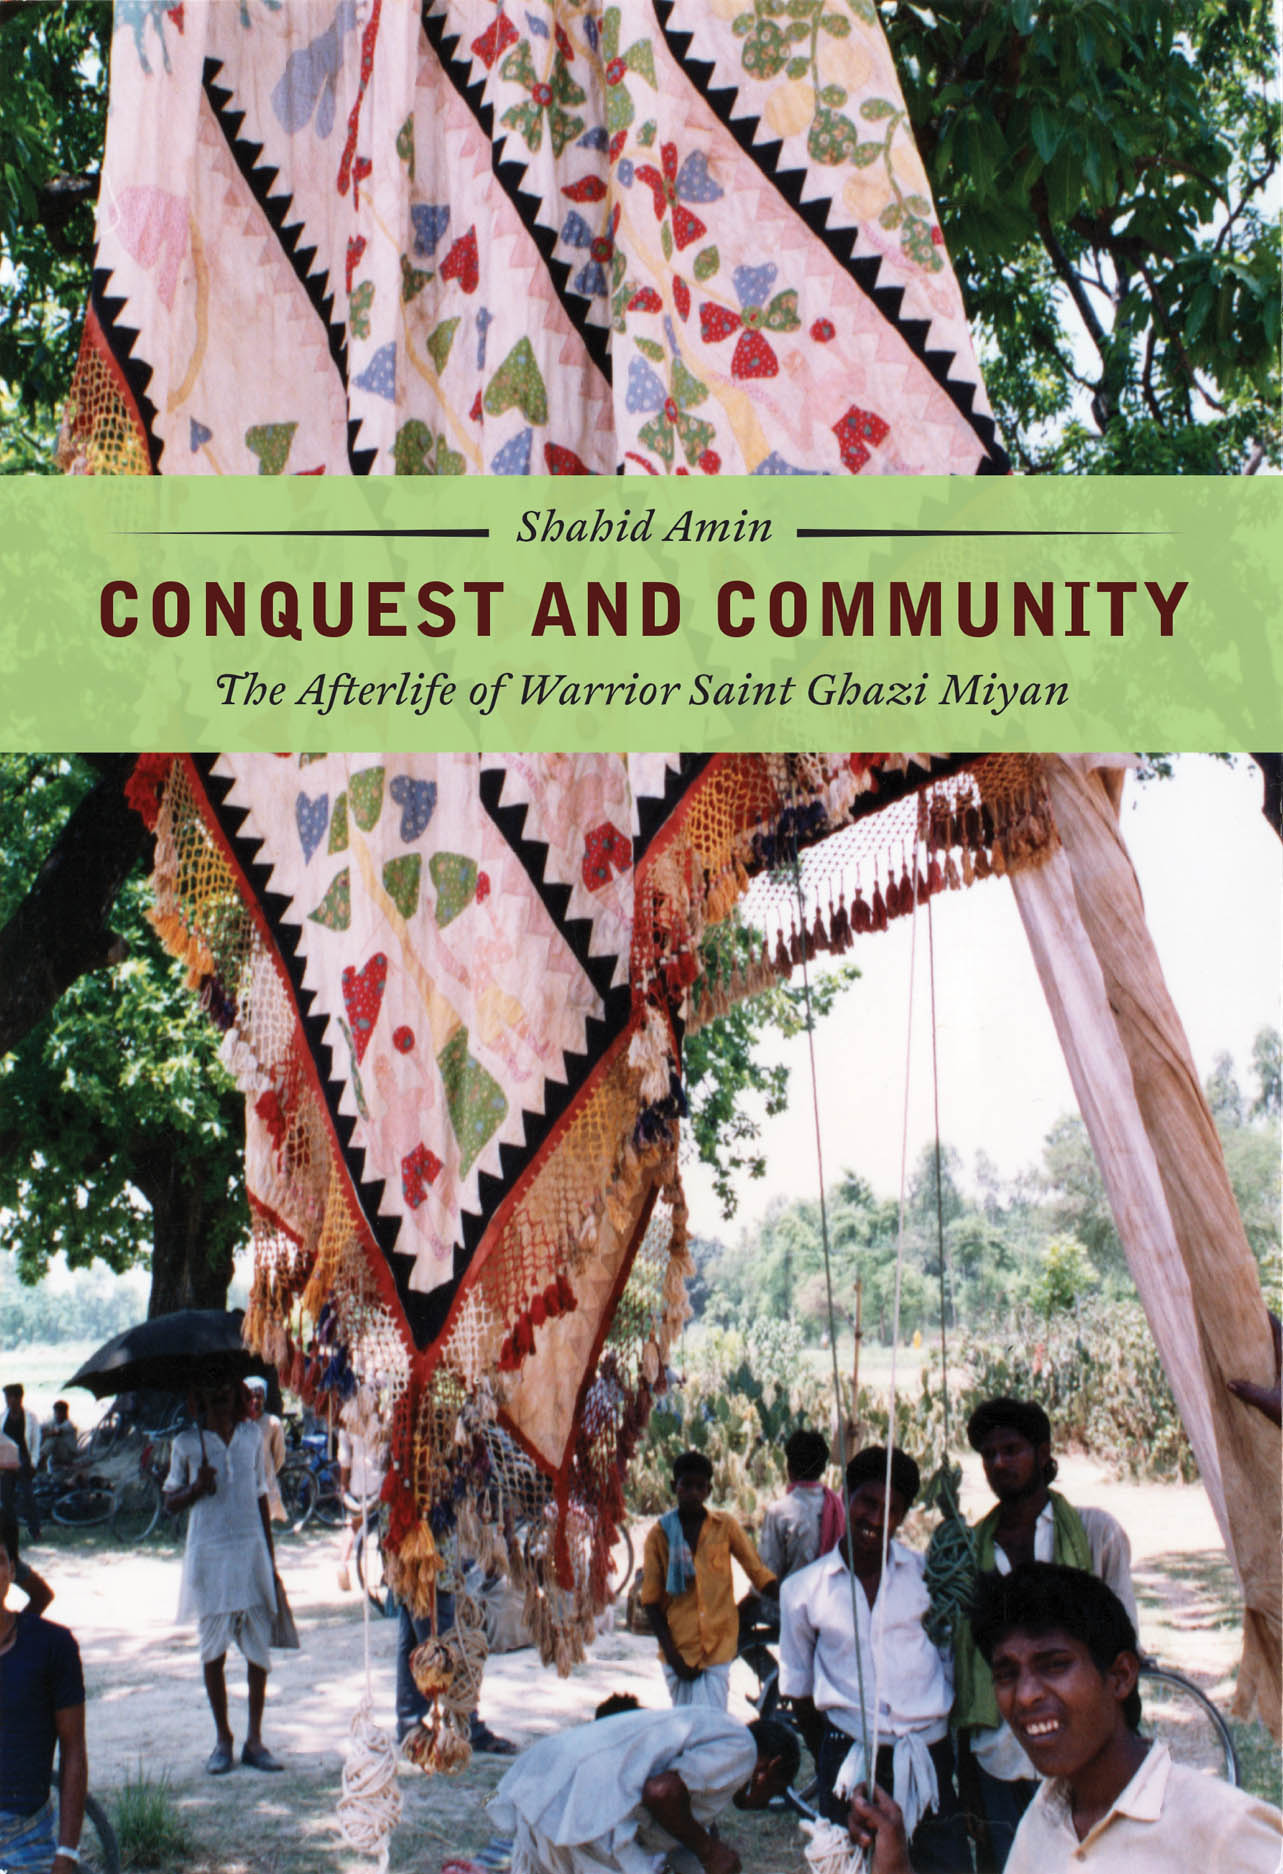 Does Conquest Pay?  Princeton University Press